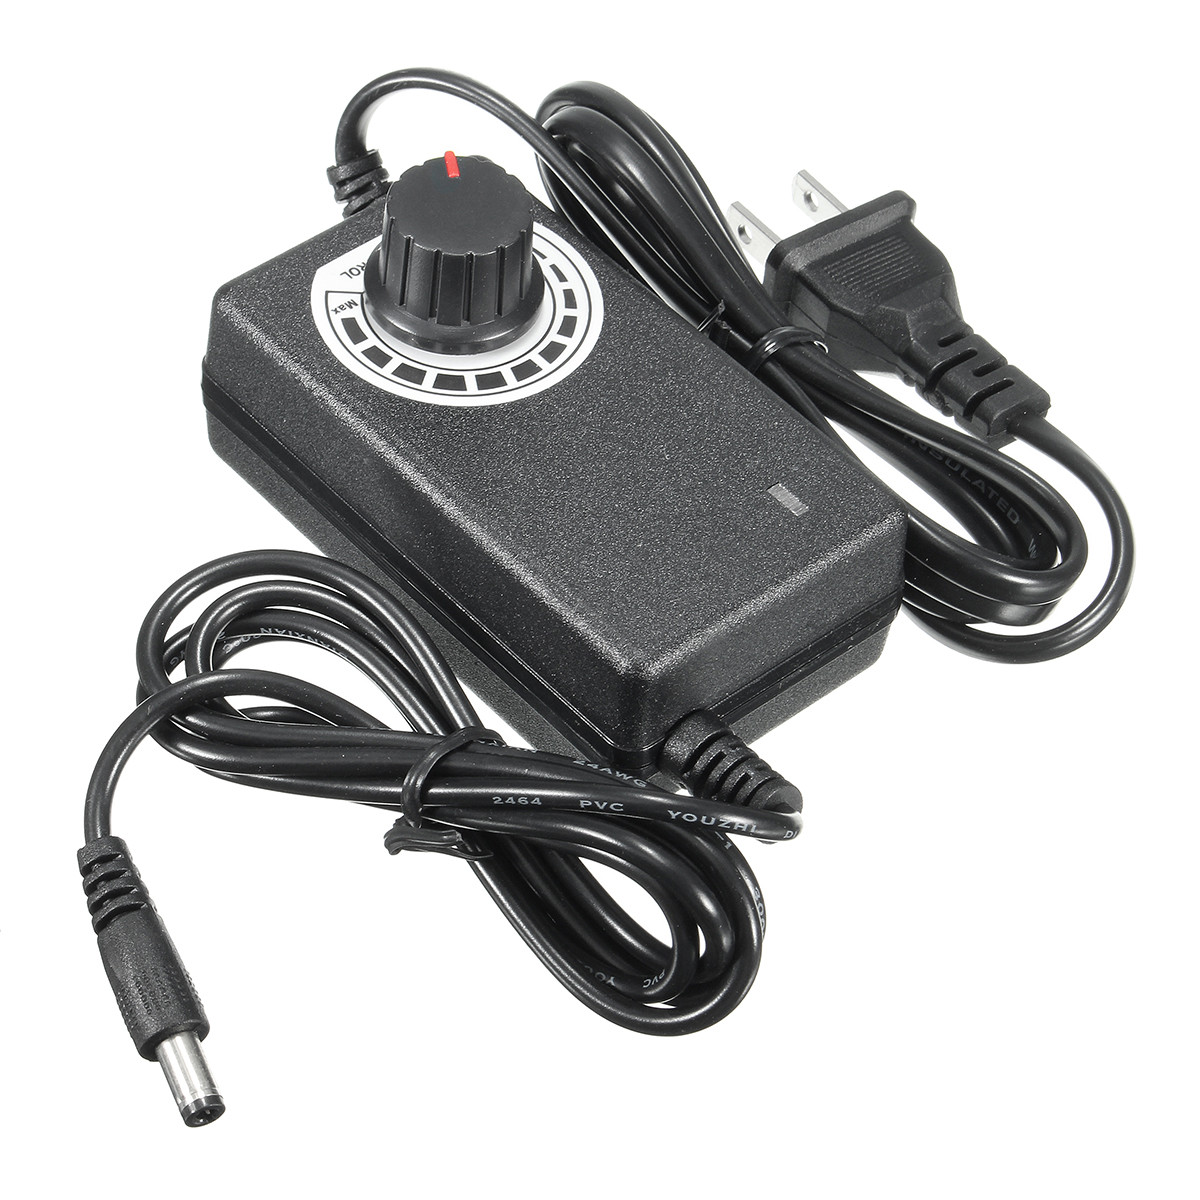 Excellwayreg-3-12V-2A-24W-Adjustable-ACDC-Adapter-Switching-Power-Adapter-Motor-Speed-Controller-1280687-1